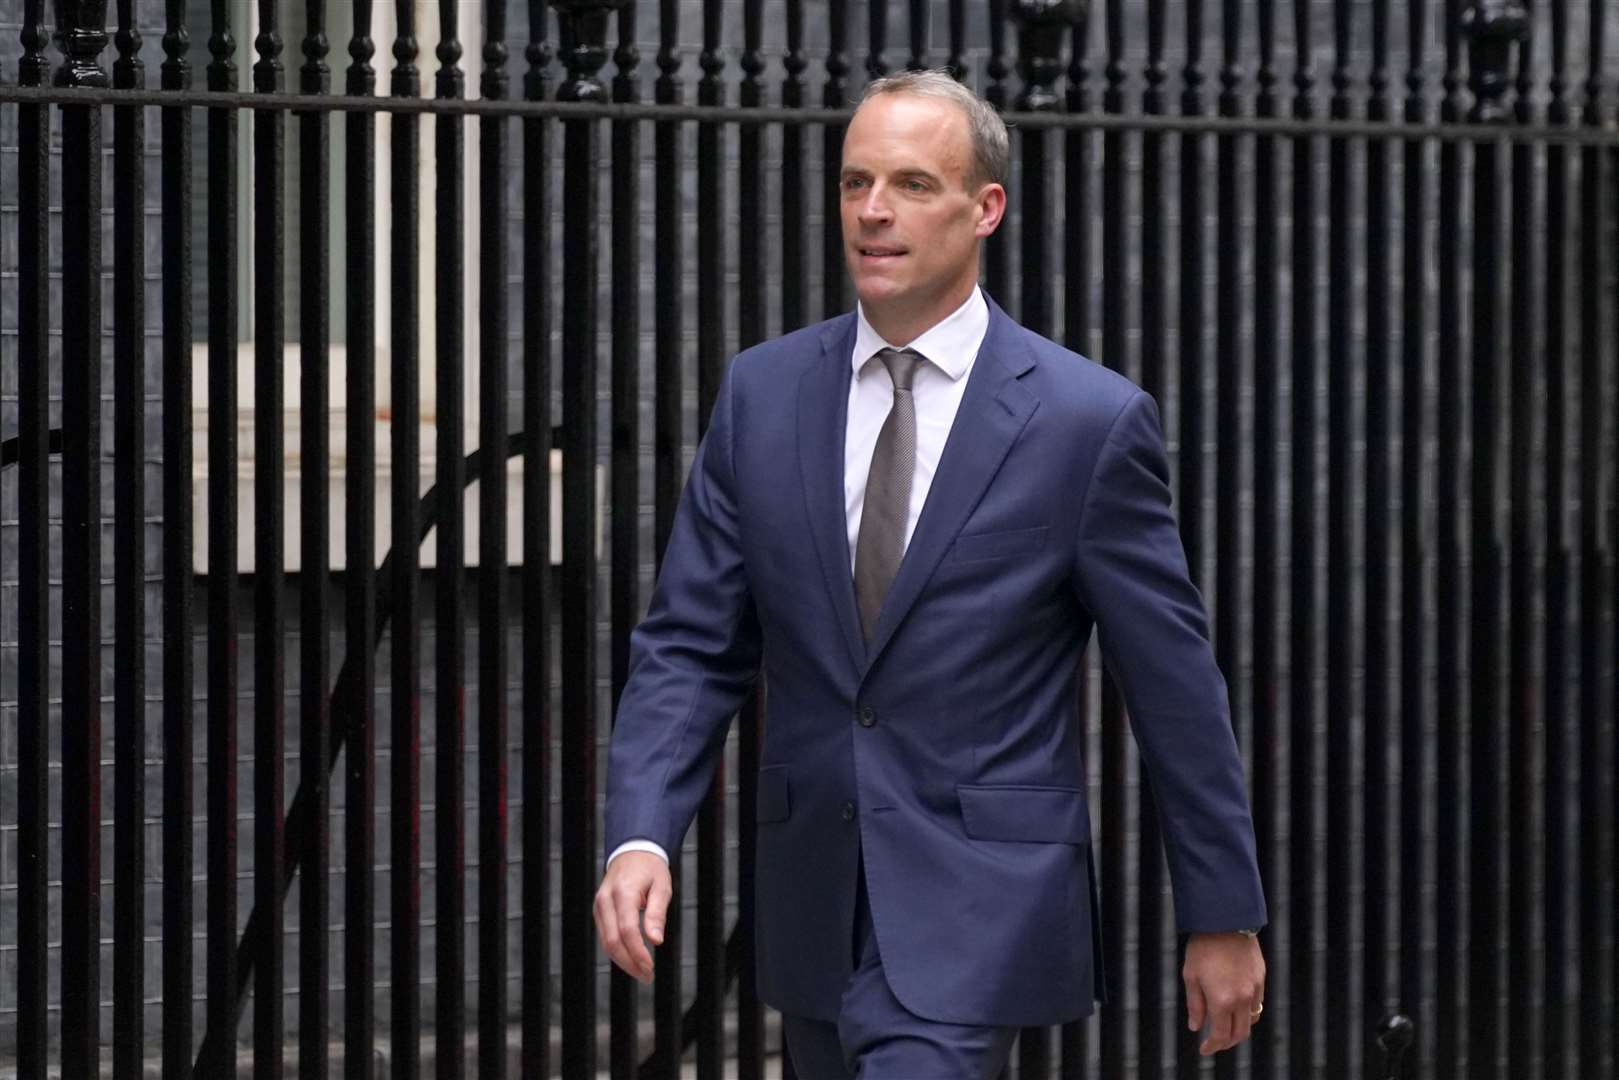 Dominic Raab was removed from the Foreign Office during the reshuffle (Stefan Rousseau/PA)